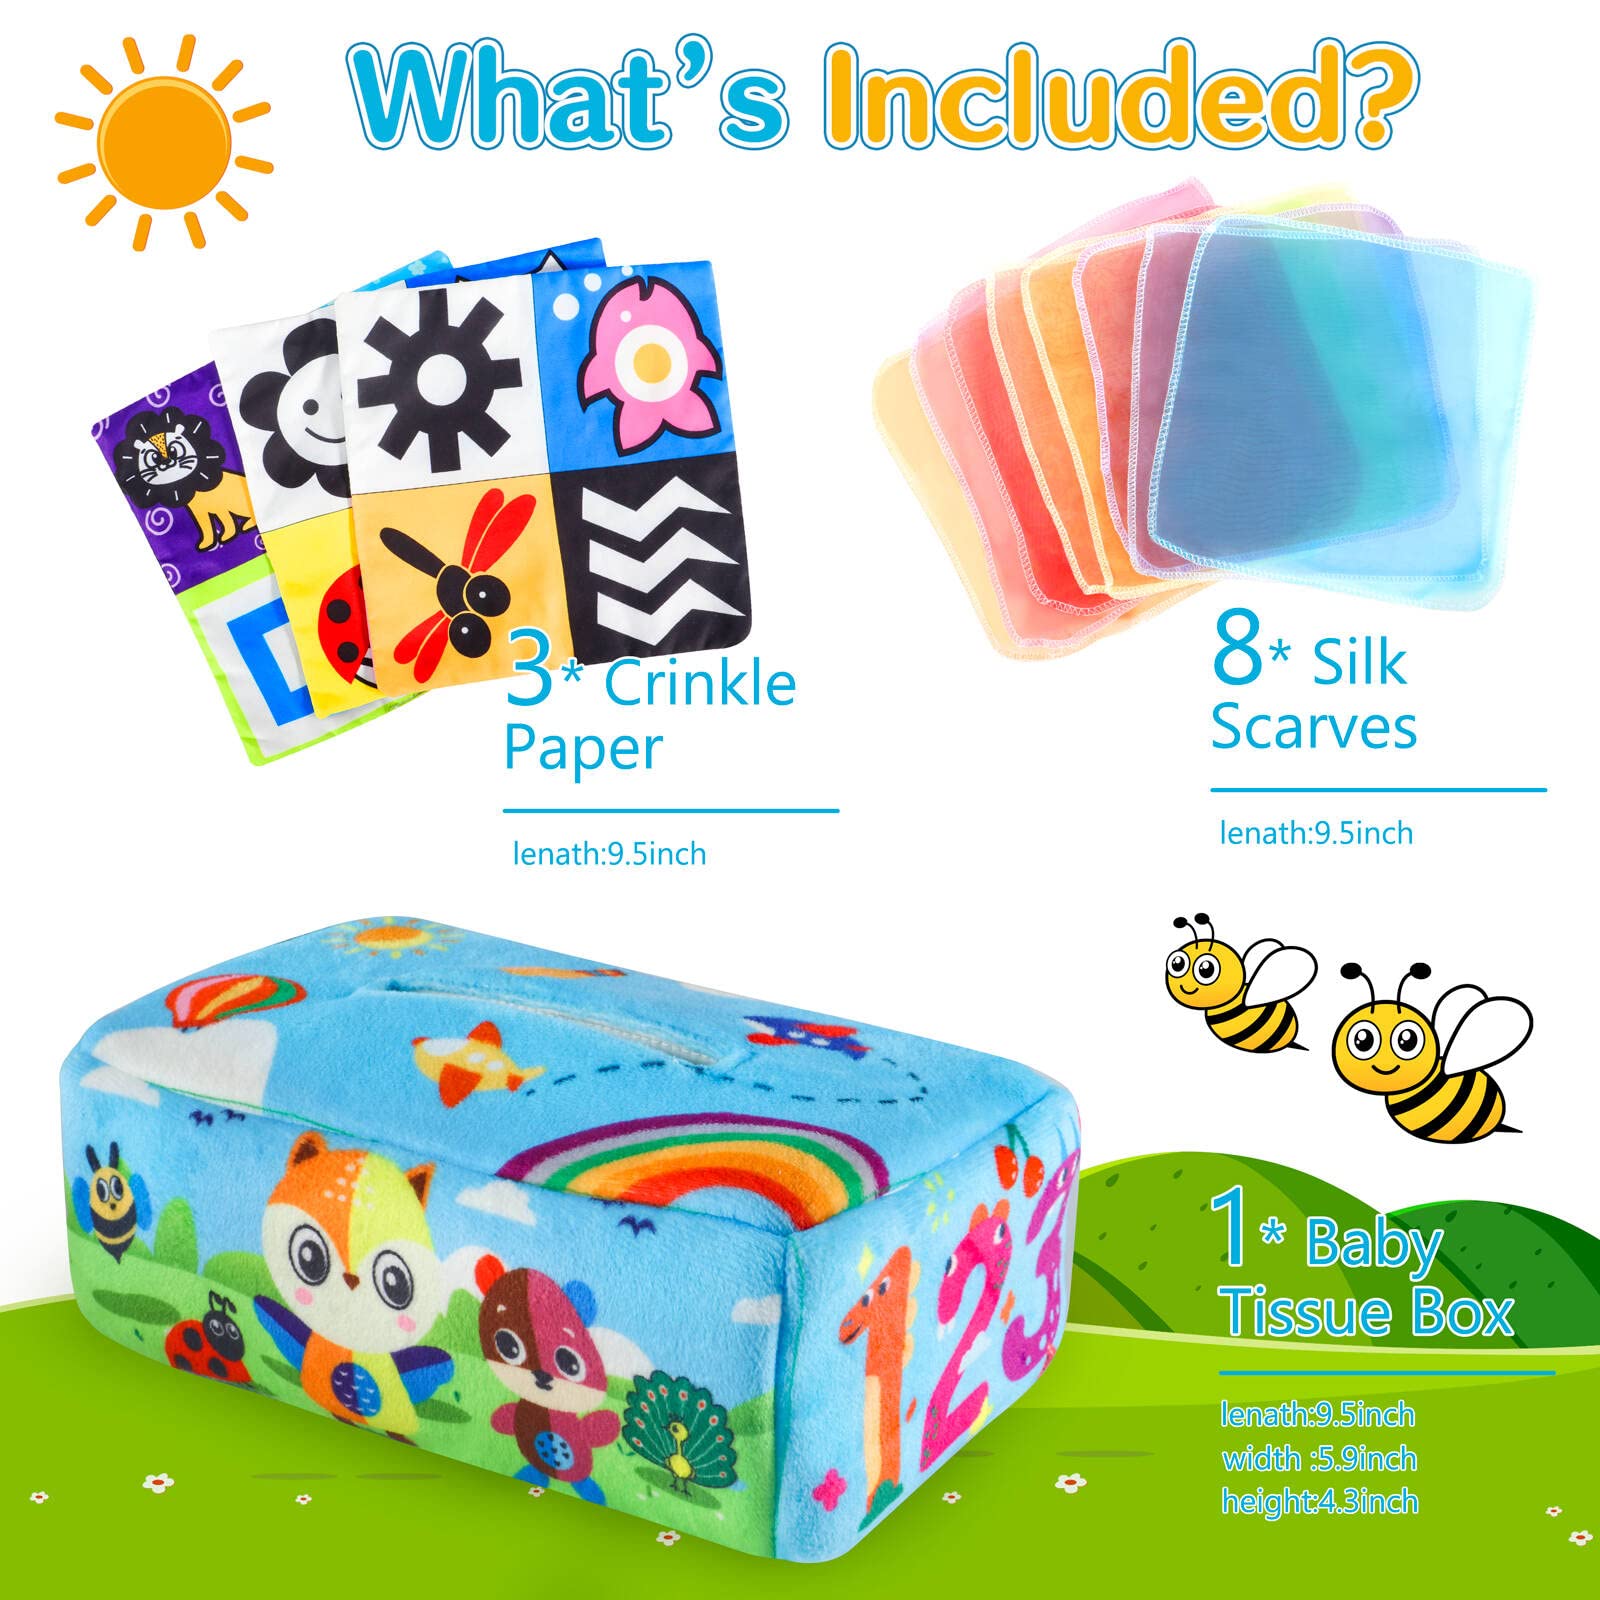 Montessori Toys for Babies 6-12 Months, Baby Tissue Box Toy Soft Stuffed Crinkle, Magic Tissue Box Play Scarves for Babies Sensory Tissue Toys for Infants, Newborns Early Development & Activity Toys